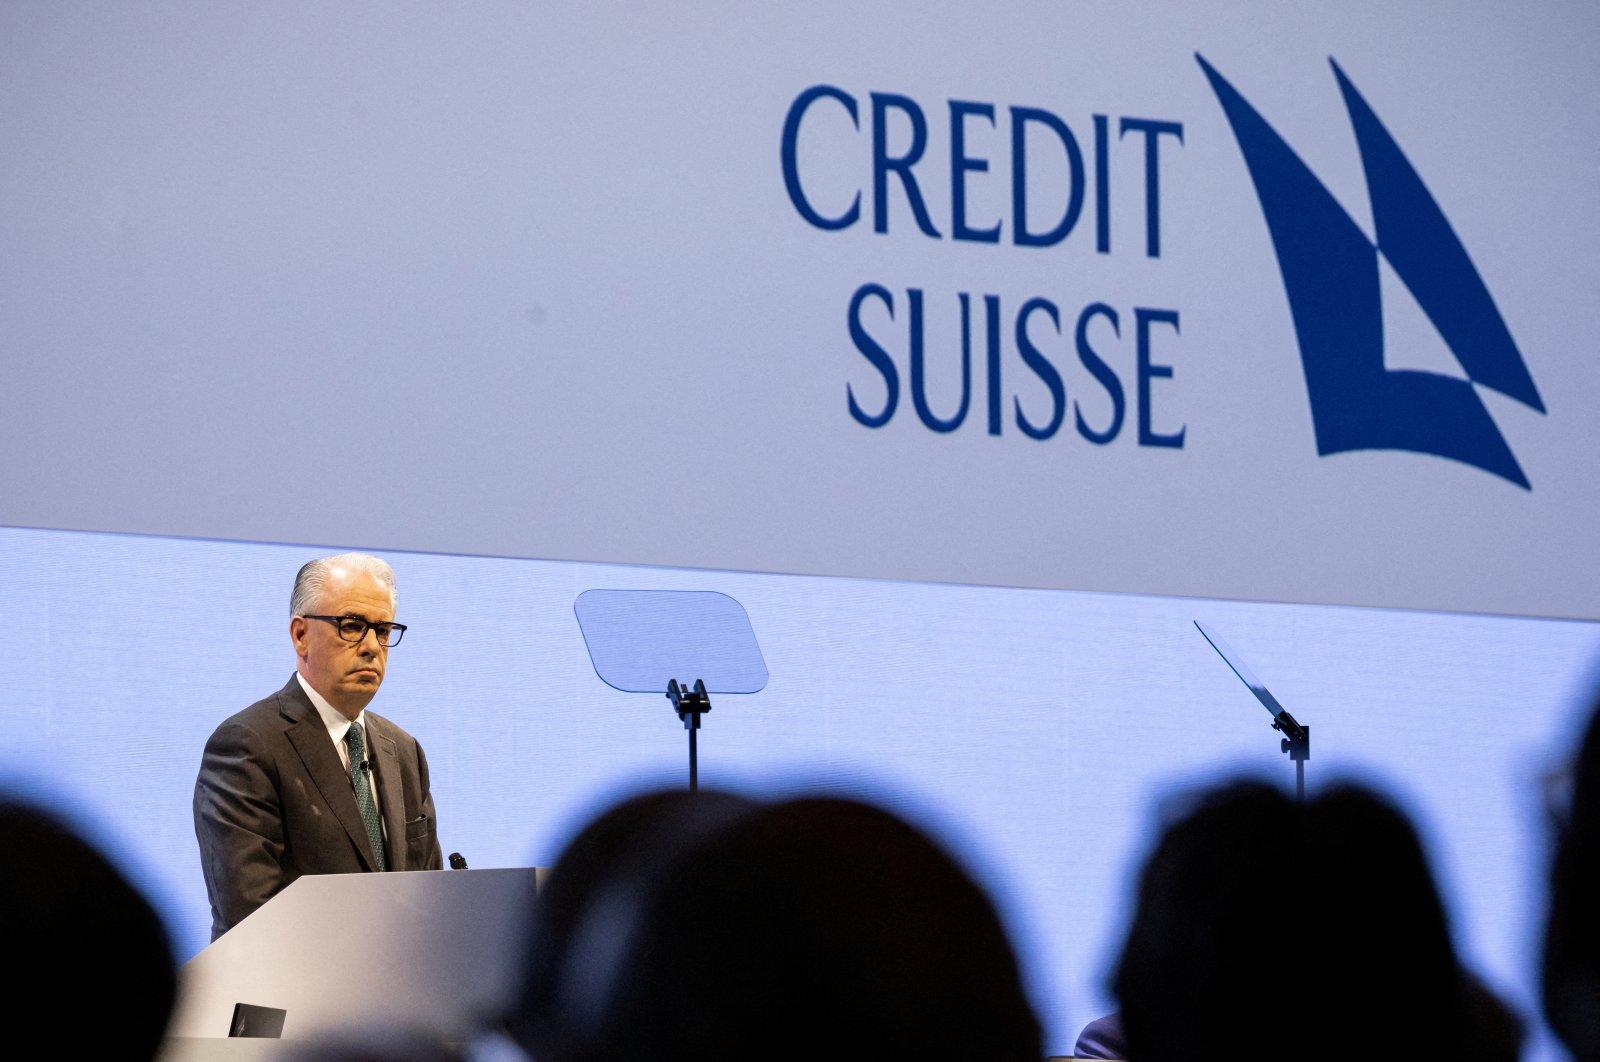 Credit Suisse CEO Ulrich Koerner speaks during the Annual General Meeting, two weeks after being bought by rival UBS in a government-brokered rescue, at Hallenstadion, in Zurich, Switzerland, April 4, 2023. (Reuters Photo)